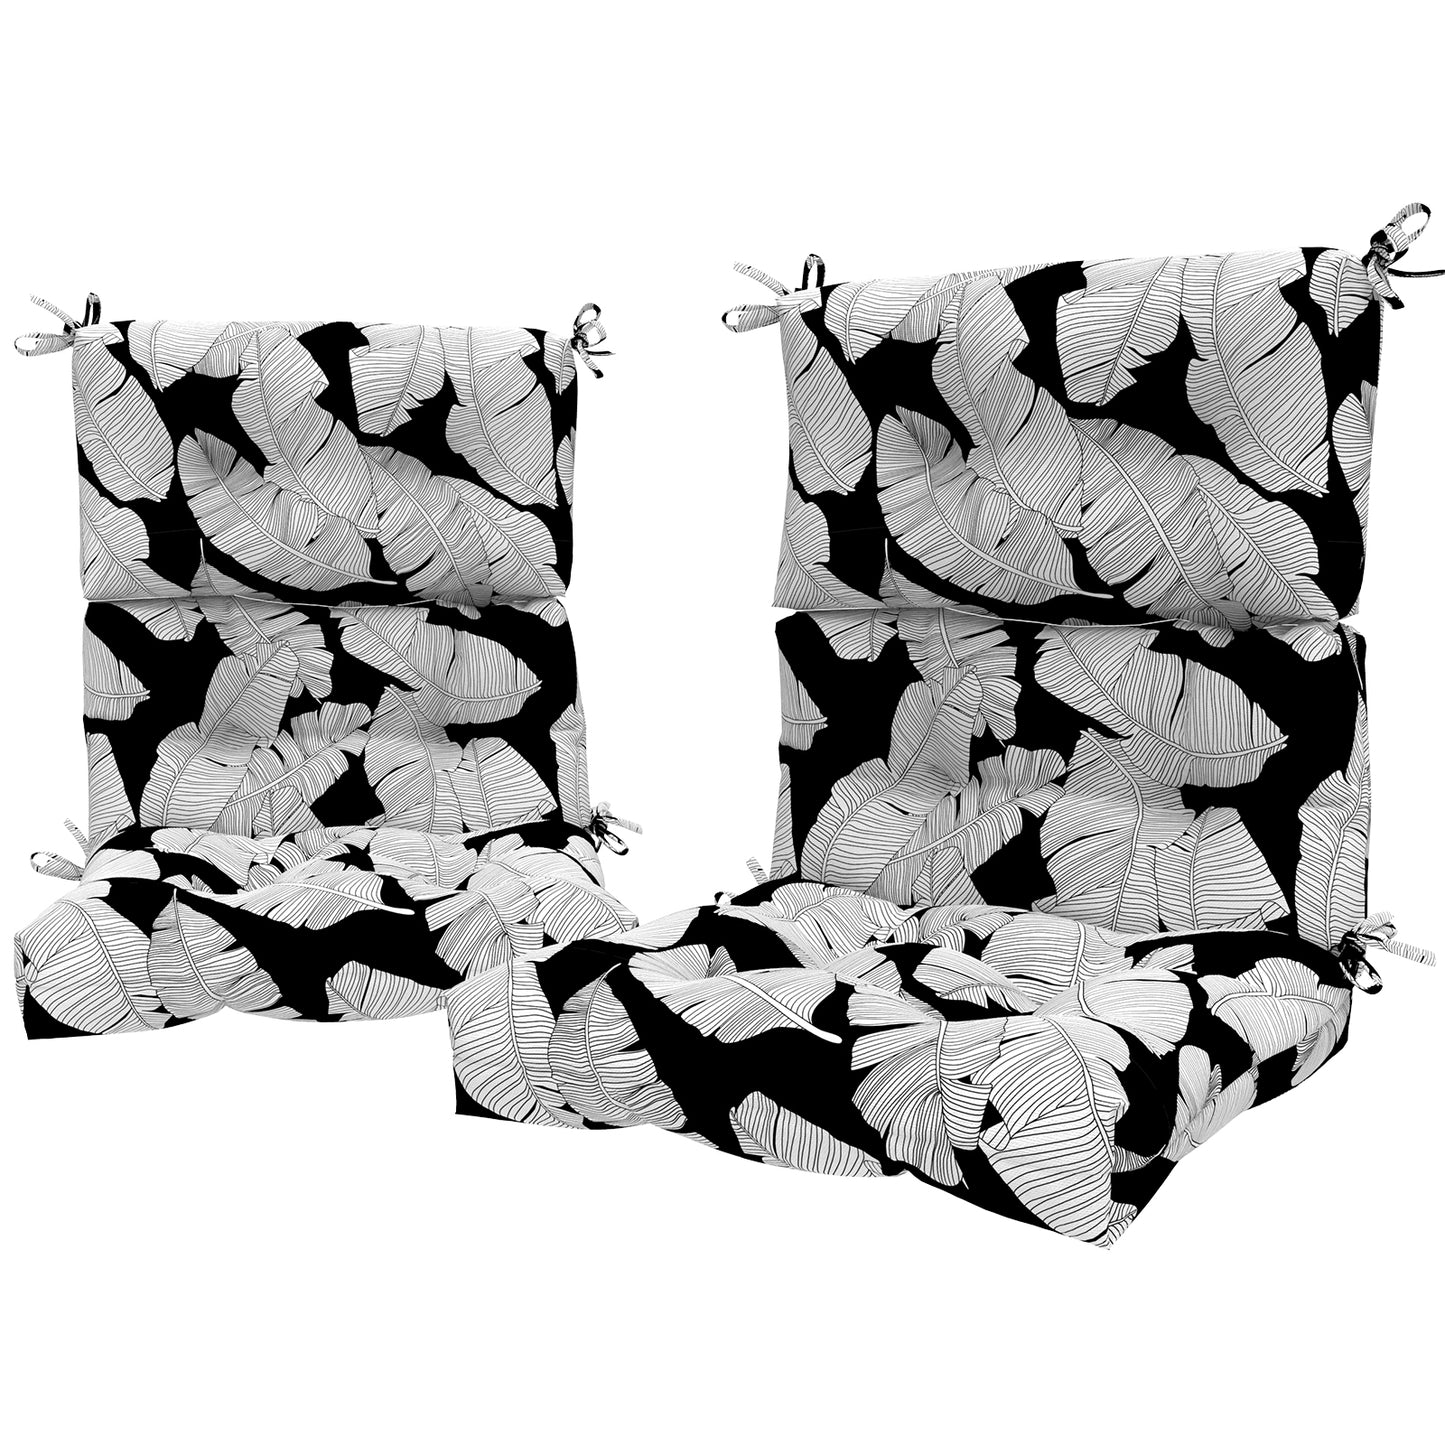 Melody Elephant Outdoor Tufted High Back Chair Cushions, Water Resistant Rocking Seat Chair Cushions 2 Pack, Adirondack Cushions for Patio Home Garden, 22" W x 20" D, Black Leaves